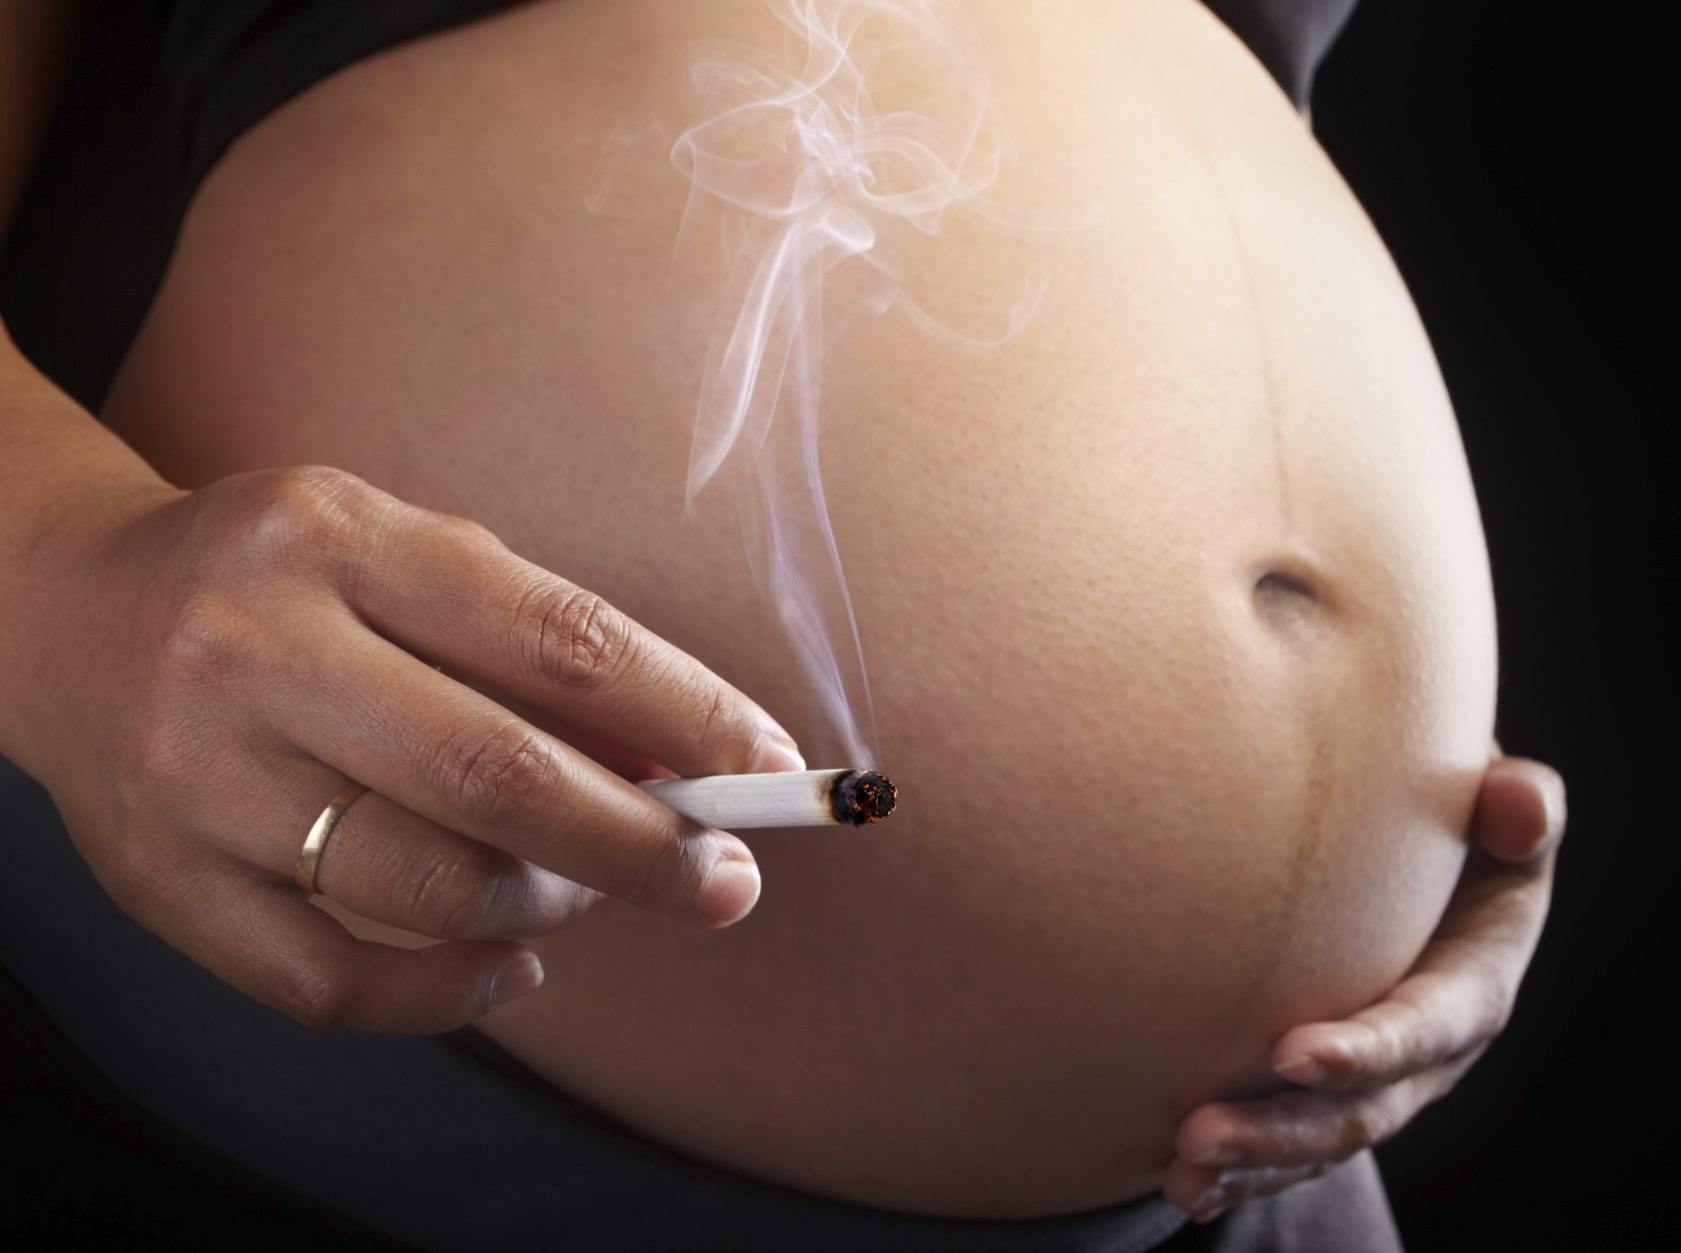 Image: American doctors once RECOMMENDED cigarette smoking for pregnant women